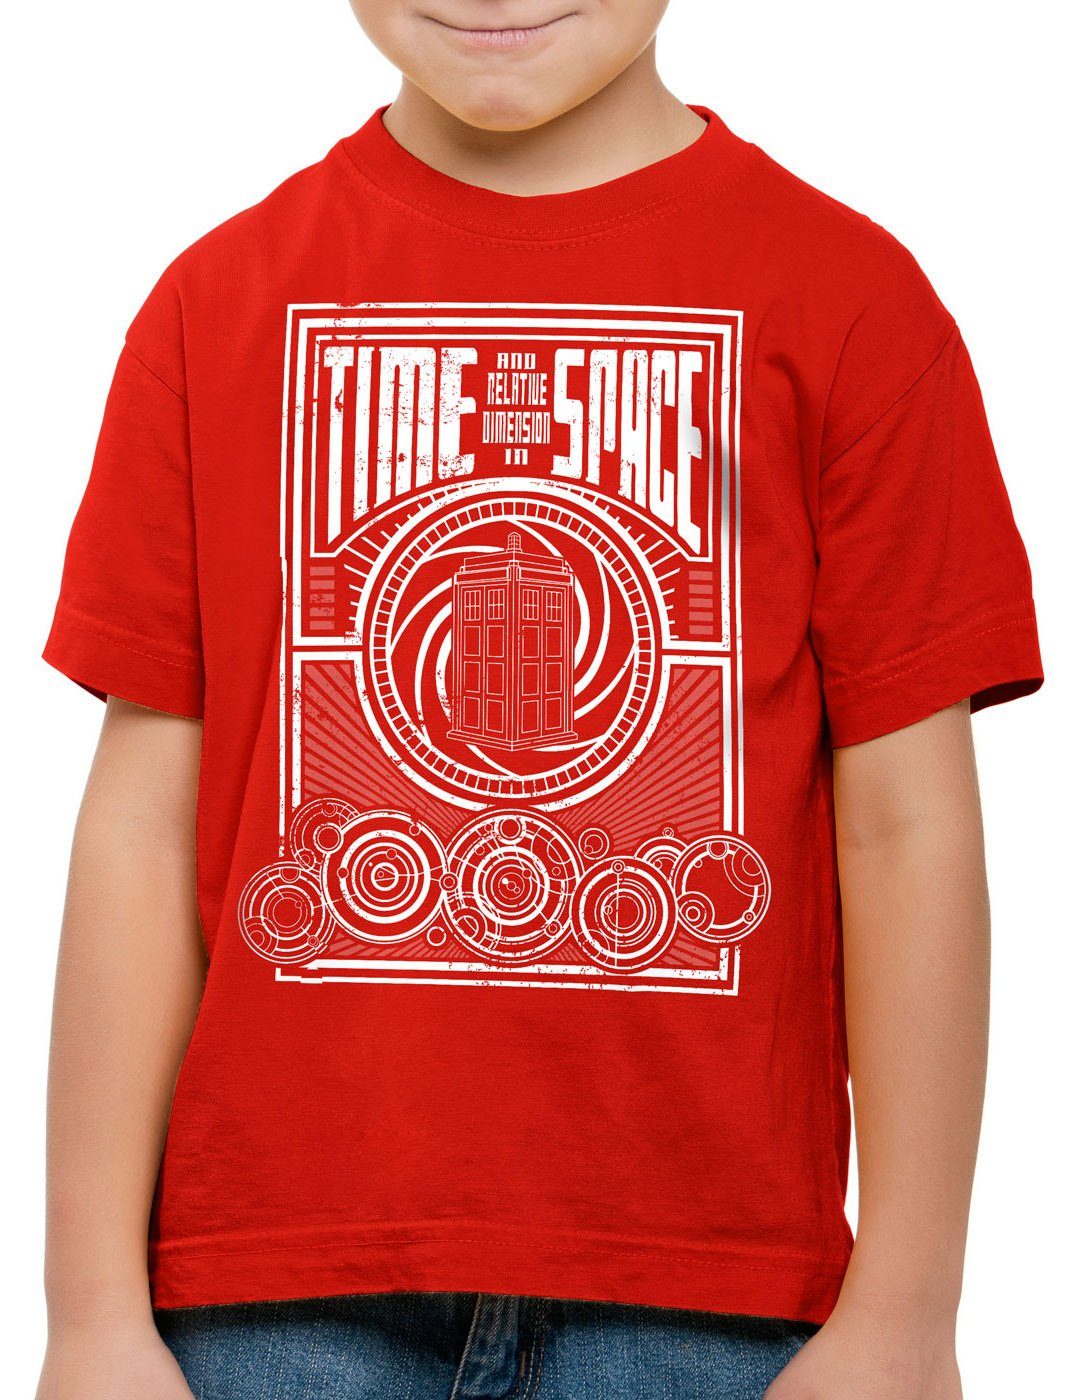 style3 Print-Shirt Kinder meets T-Shirt timelord rot zeitreise Space notrufzelle Time